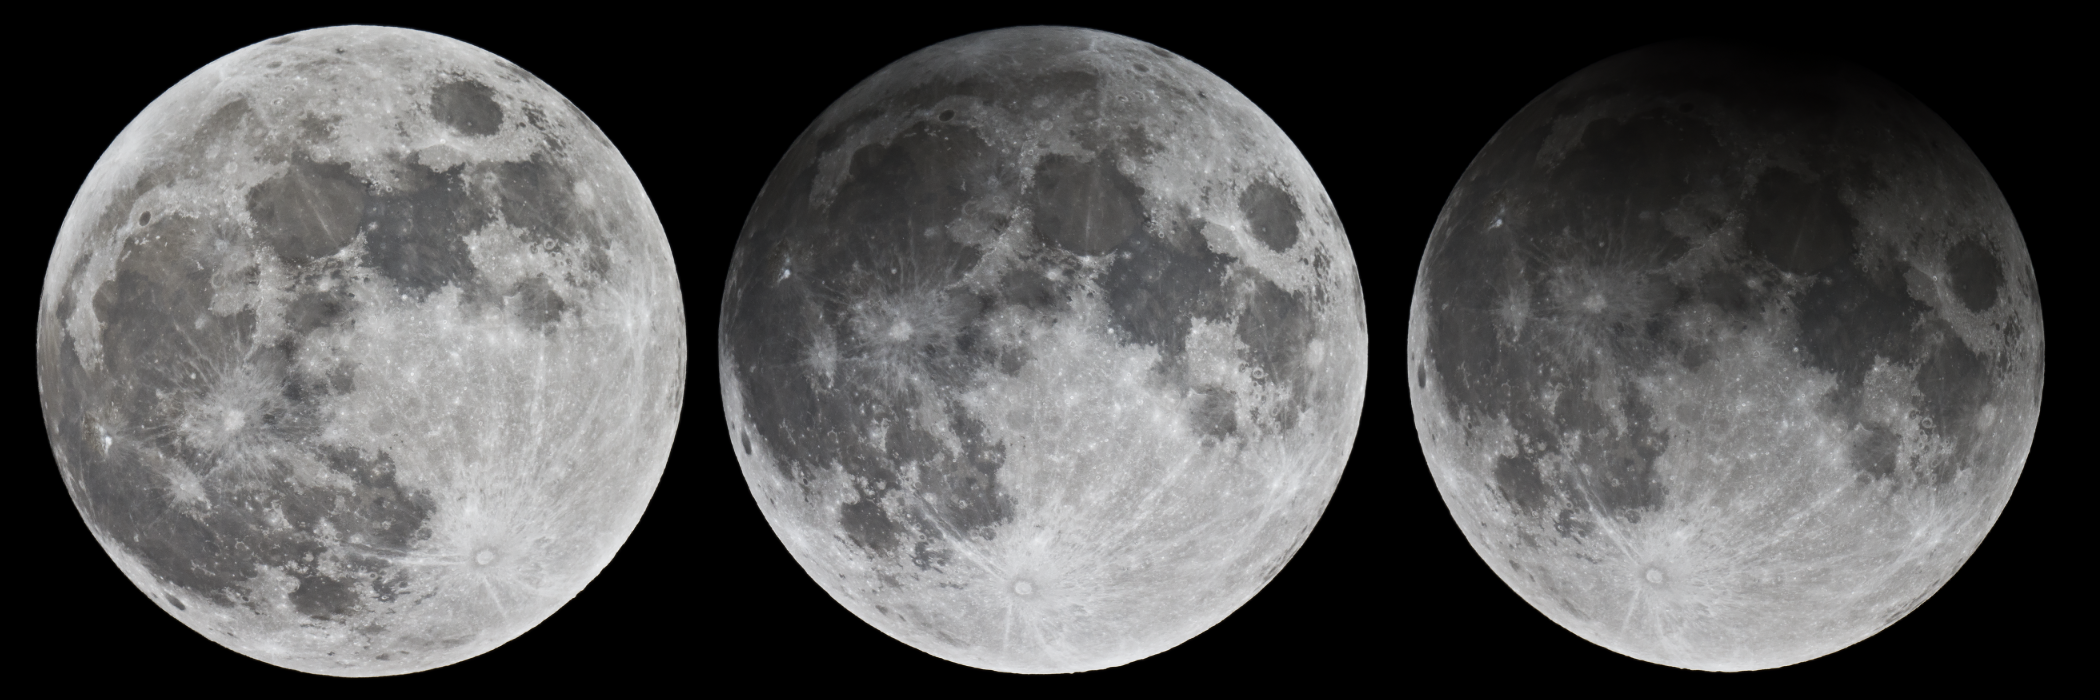 11lut17_Moon.png